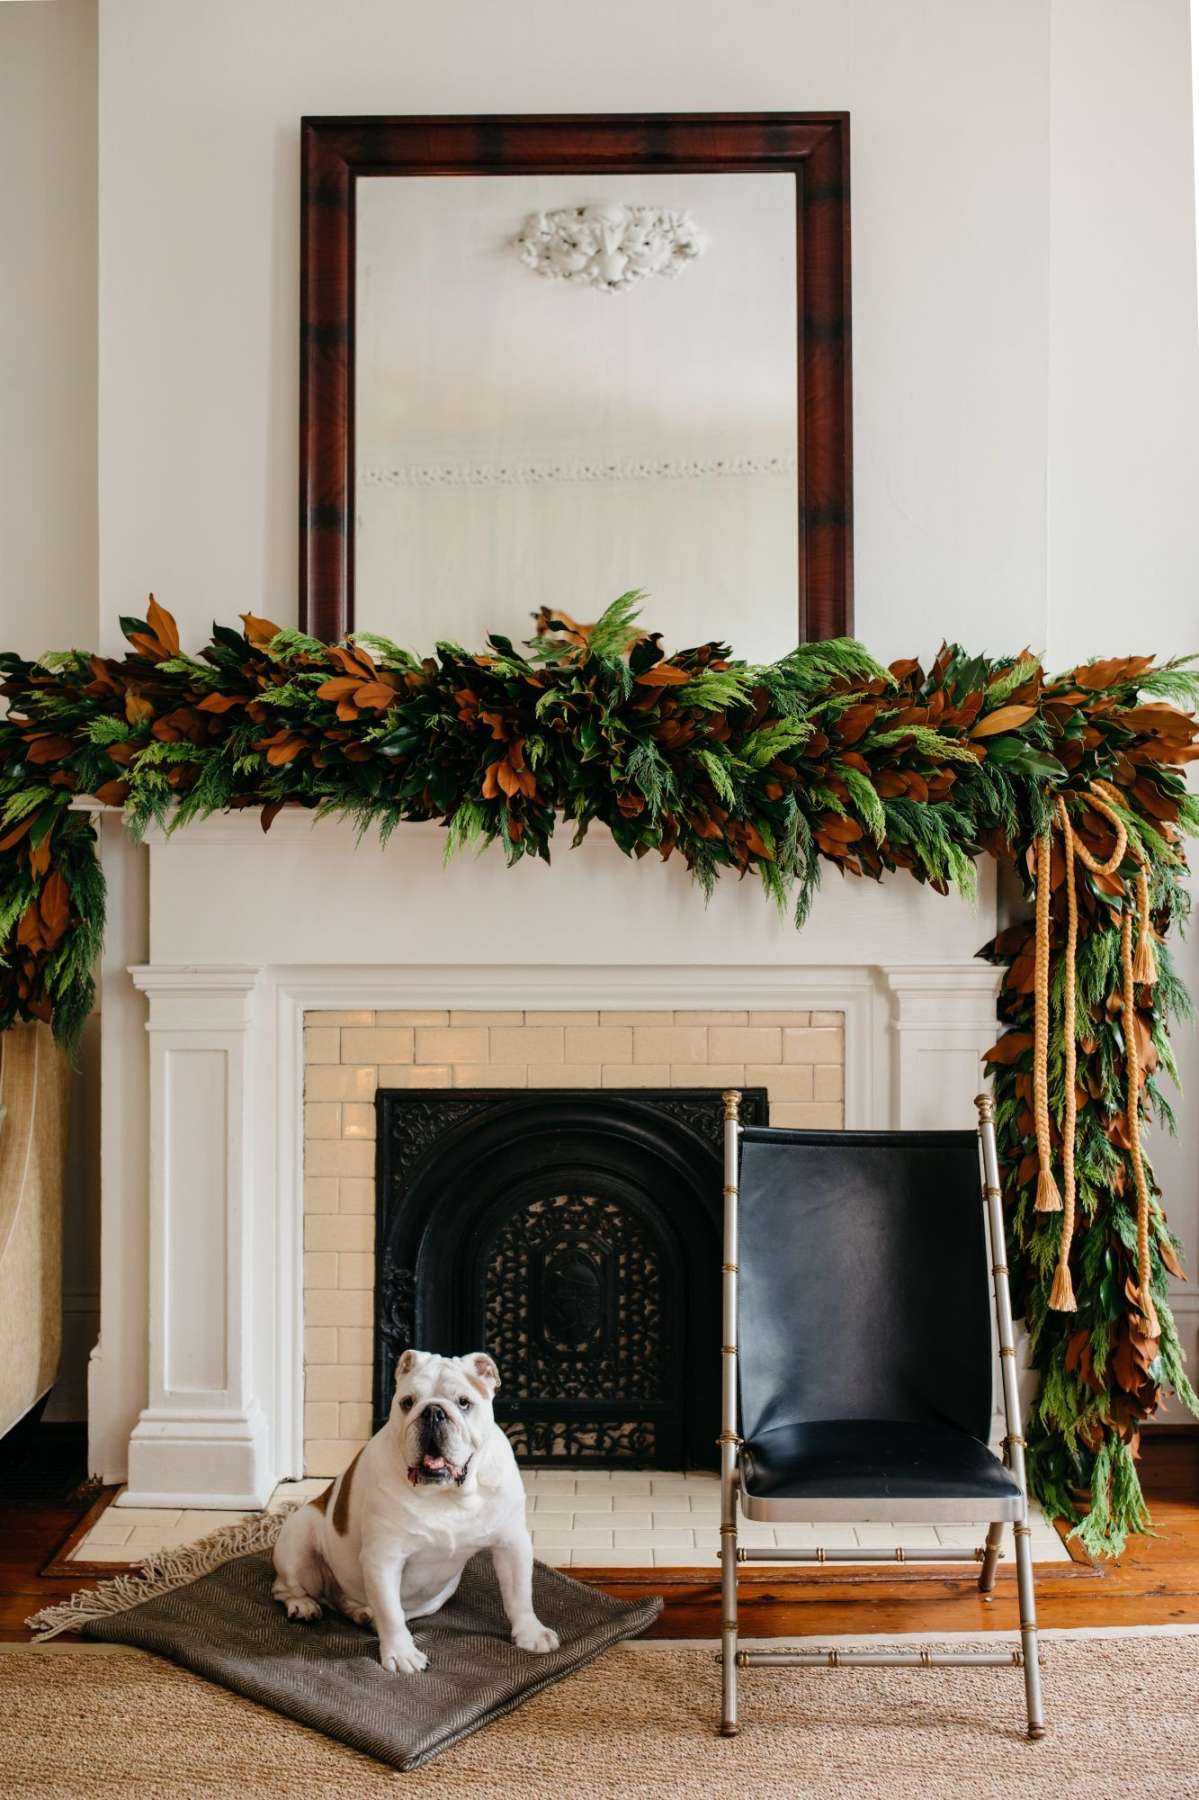 Garland Ideas for Decorating Your Mantel Every Day of the Year